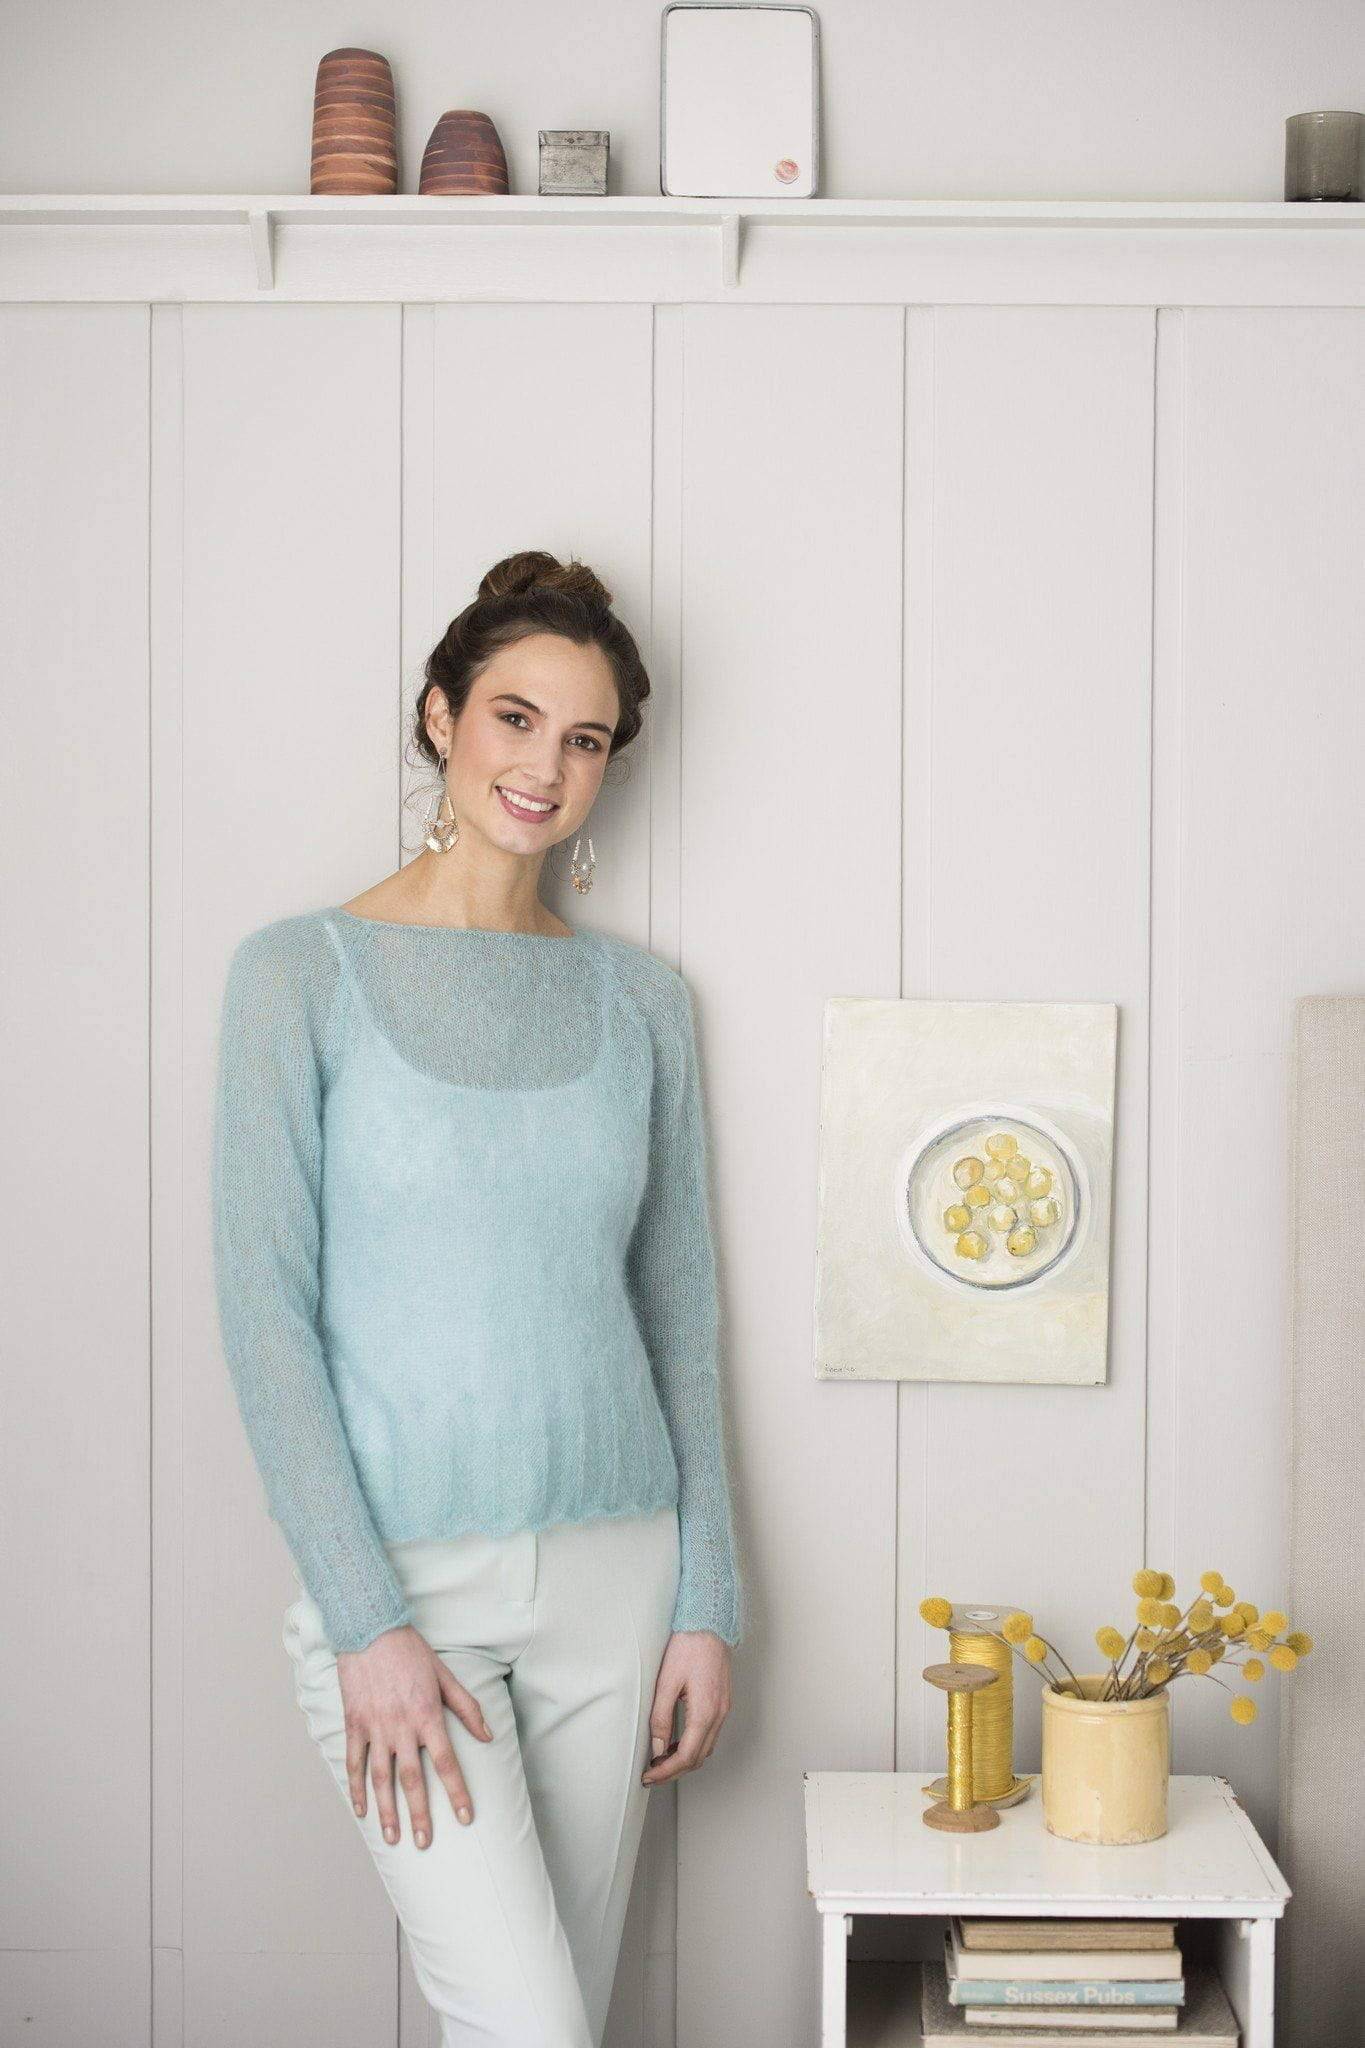 Mohair Lace Edged Sweater Knitting Pattern The Knitting Network